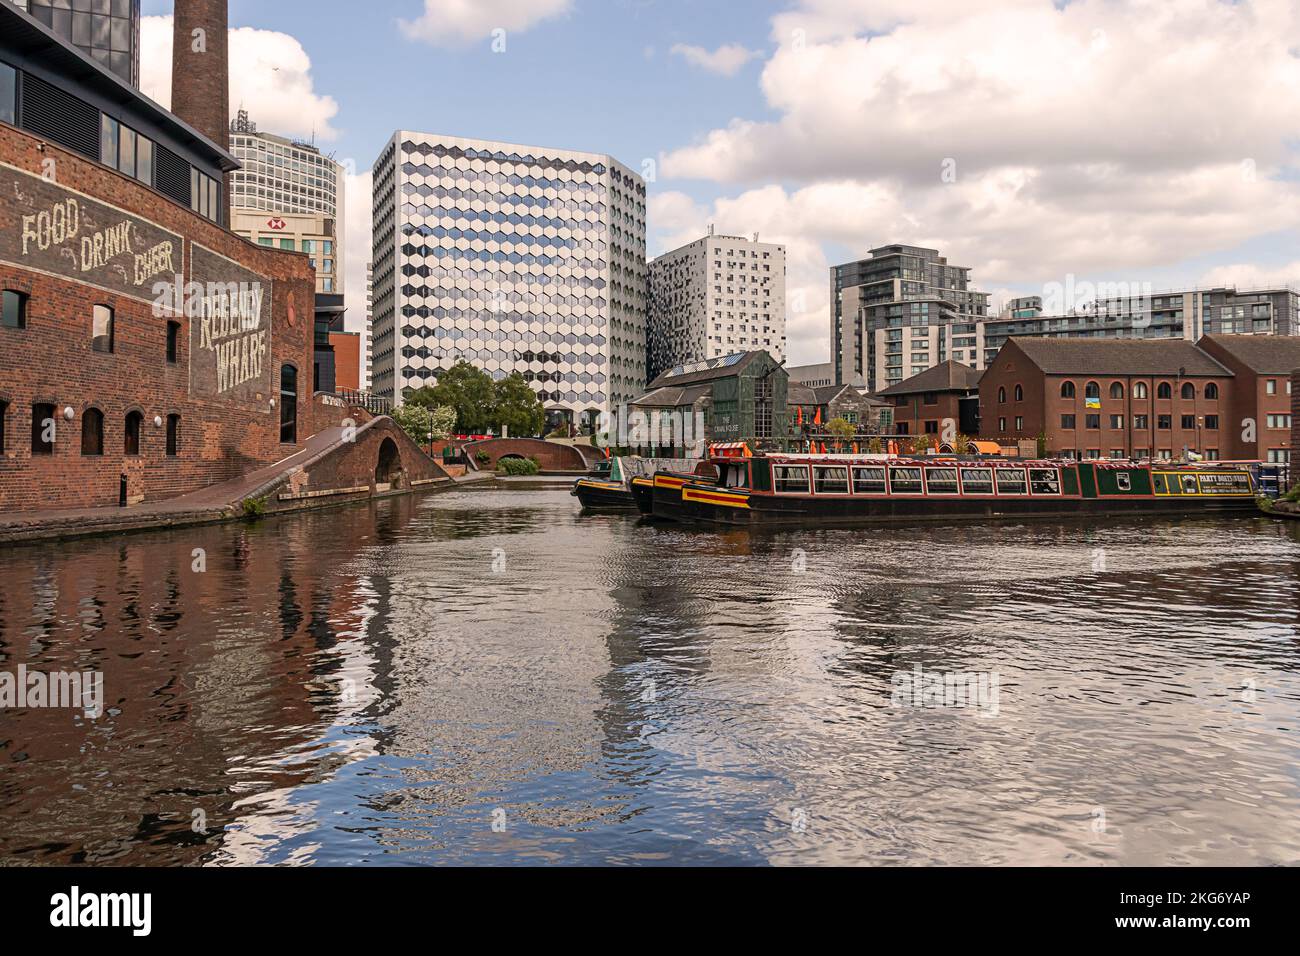 June 12, 2022 Birmingham West Midlands Great Britain. Architecture of the city. Stock Photo